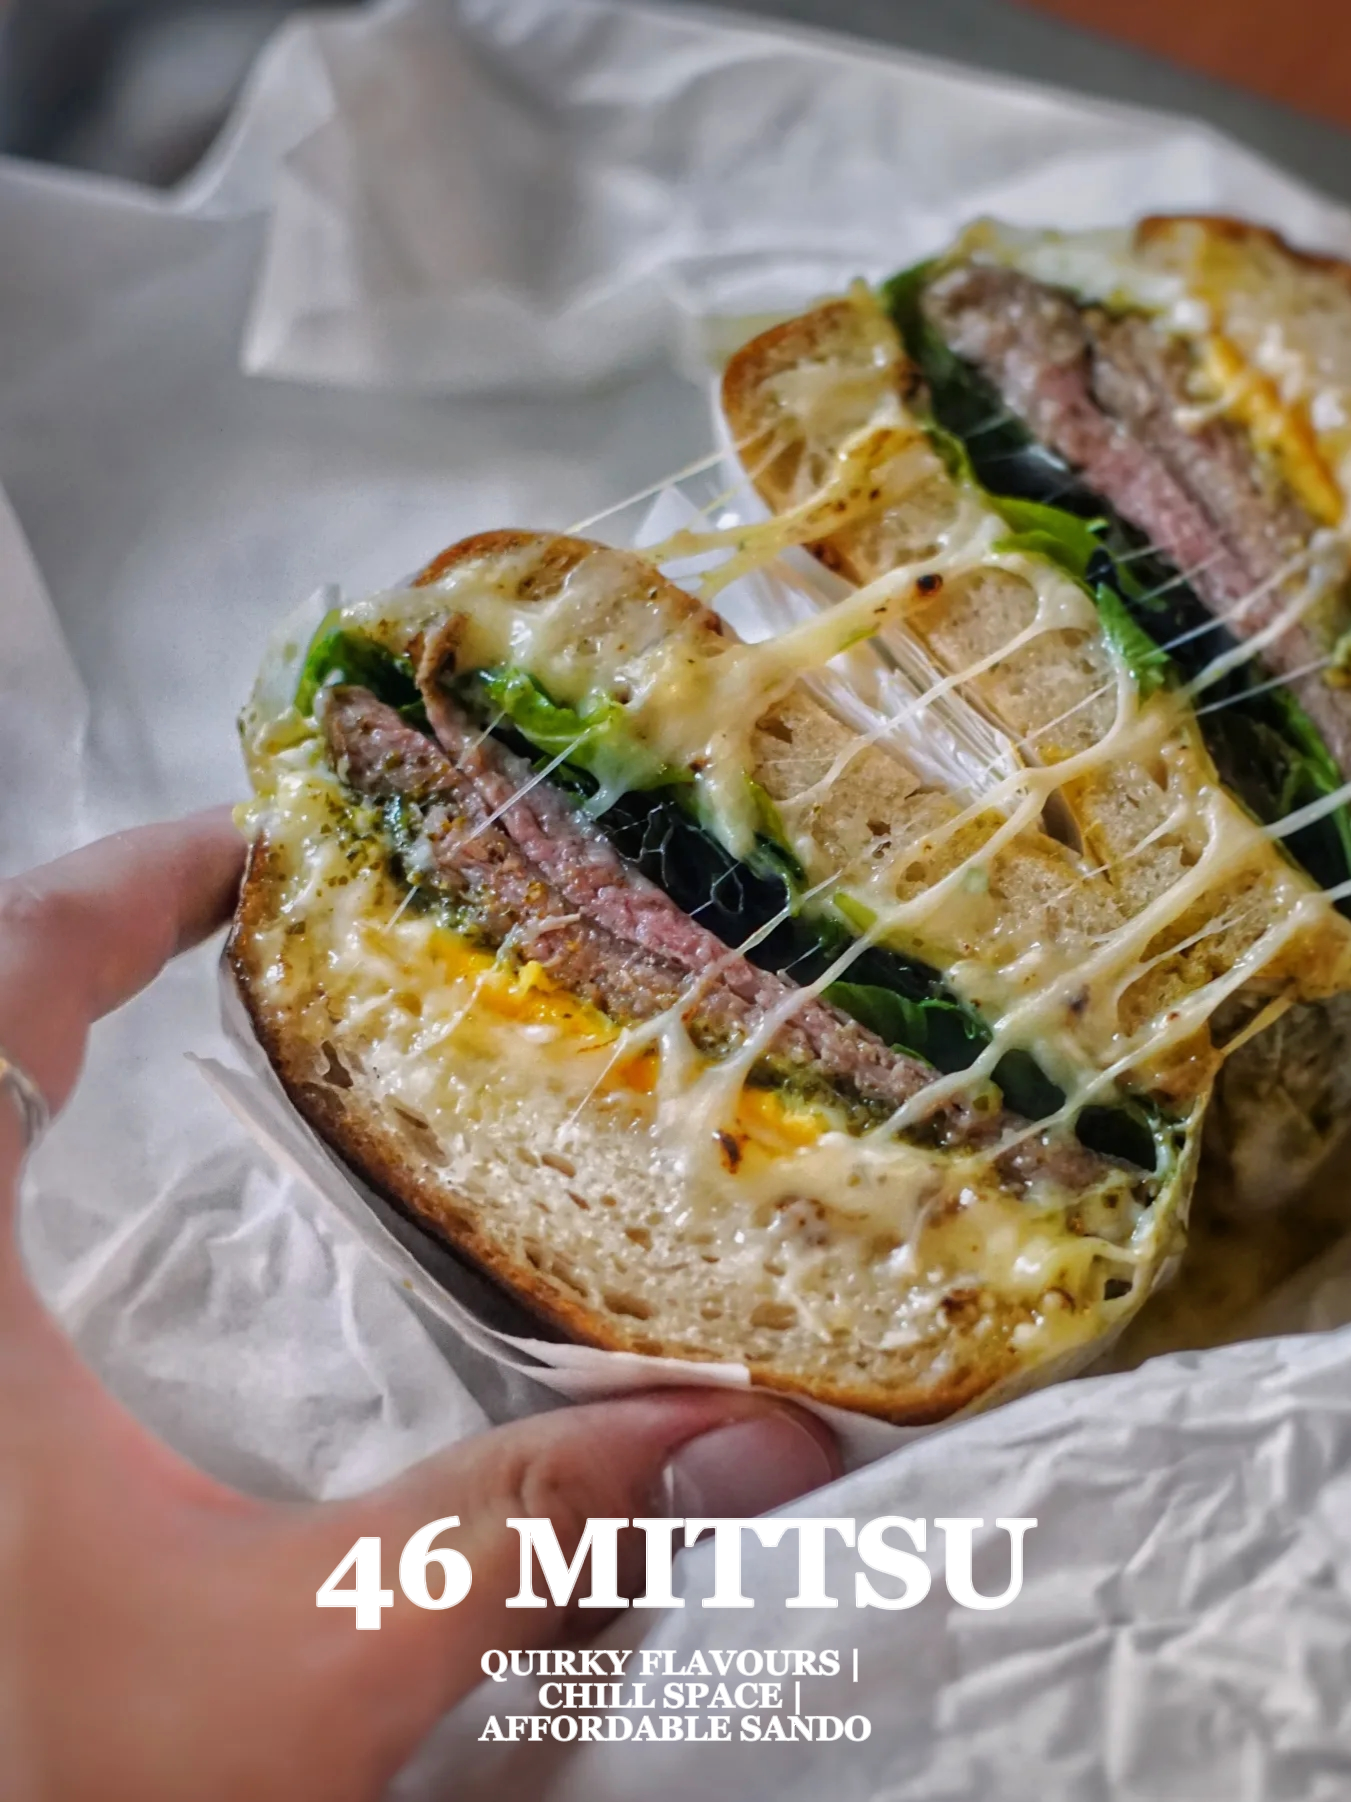 46 MITTSU, Creative Sandos Made Well & Affordable, Gallery posted by  indulgentism